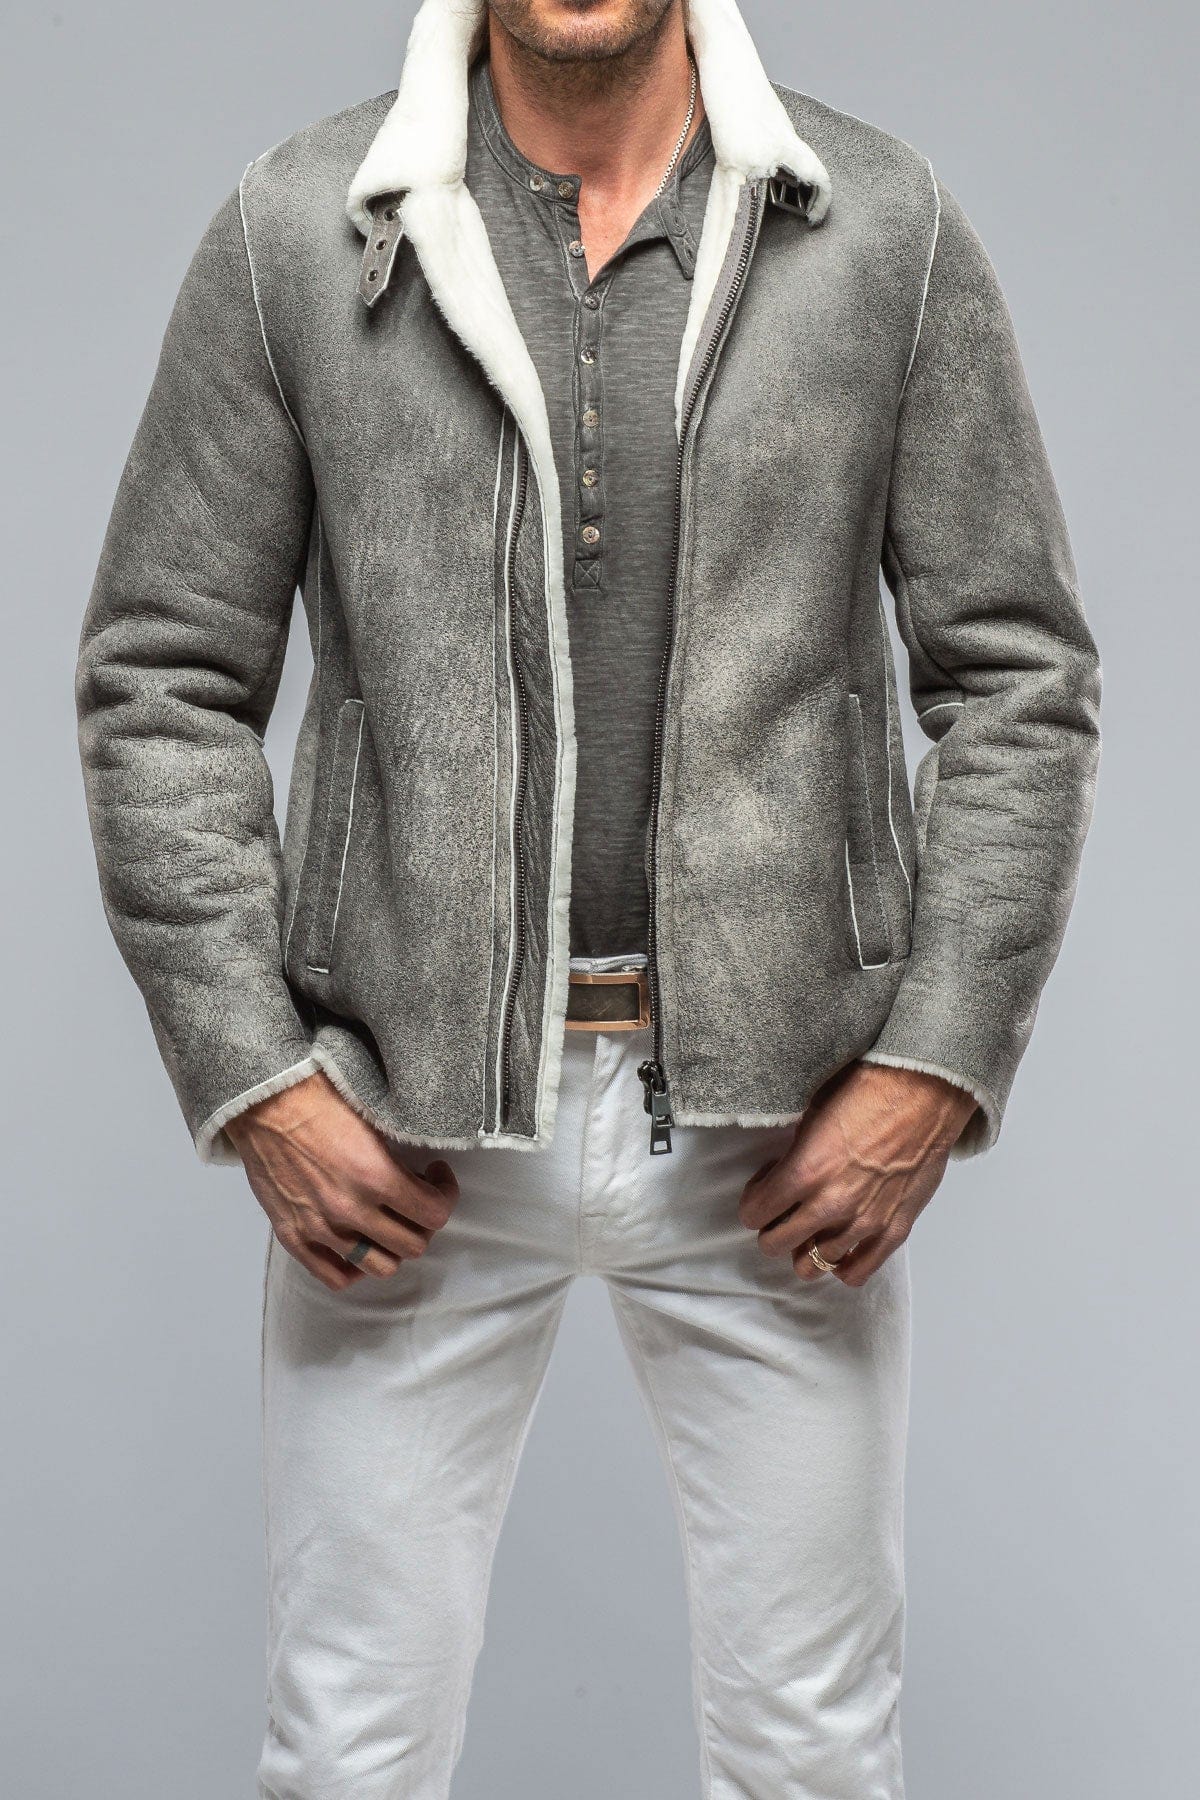 Cardwell Shearling - AXEL'S